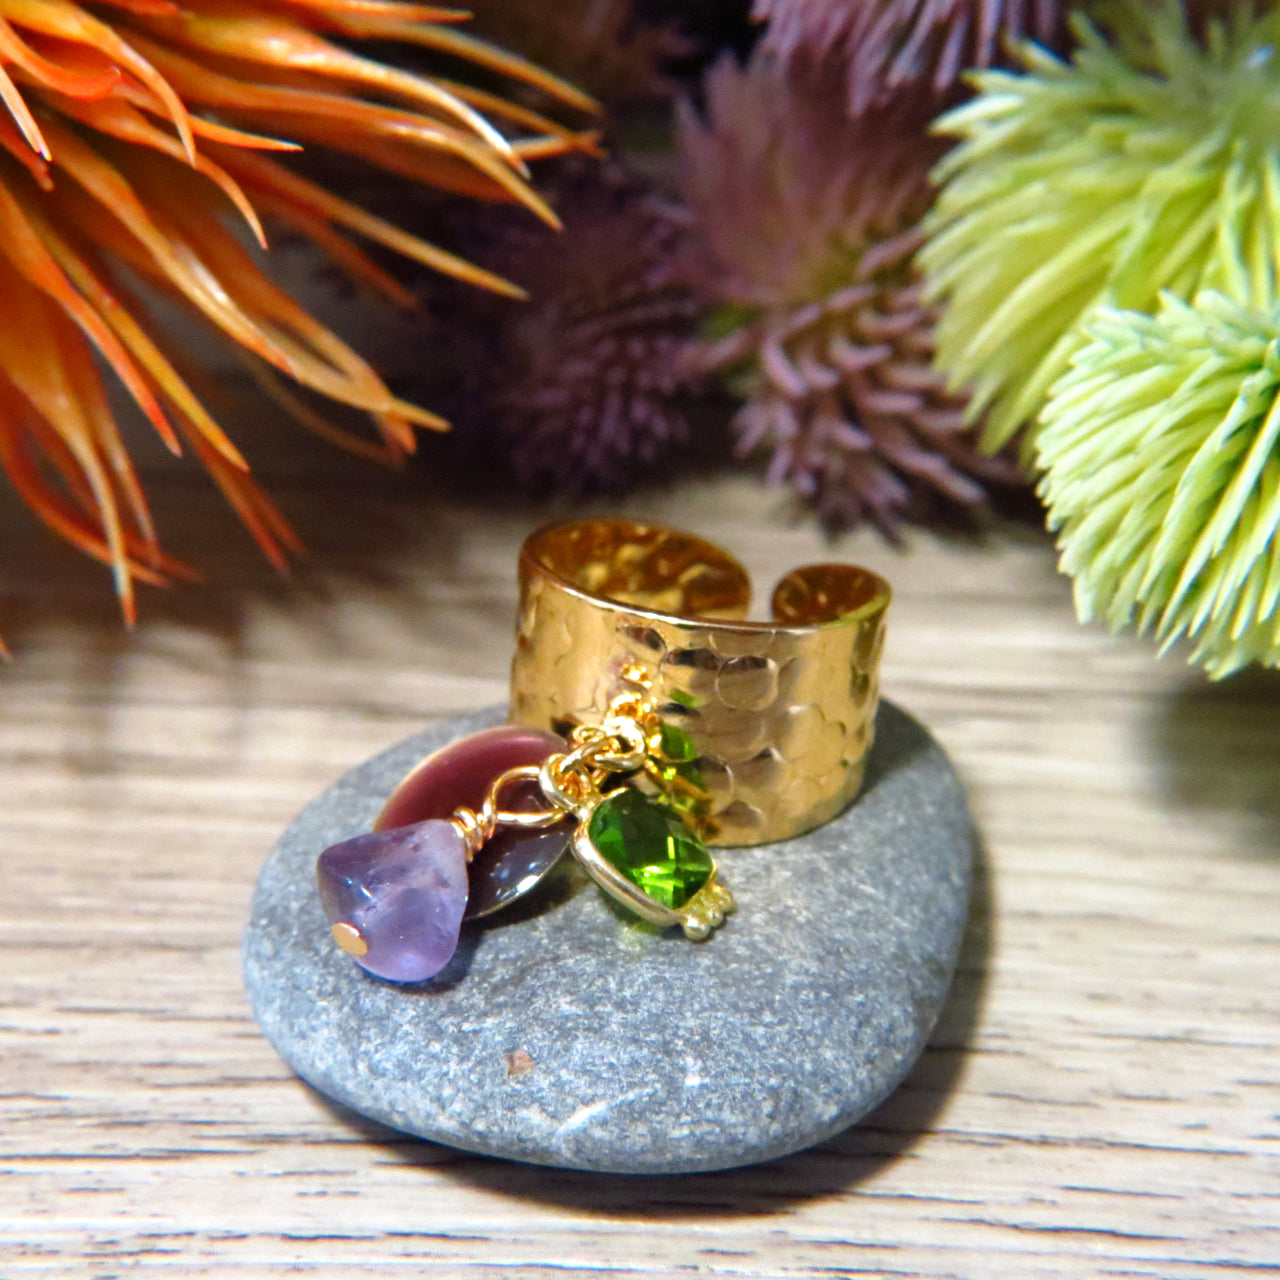 bague-femme-doree-or-fin-pierre-naturelle-peridot-sequin-email-tourmalyn